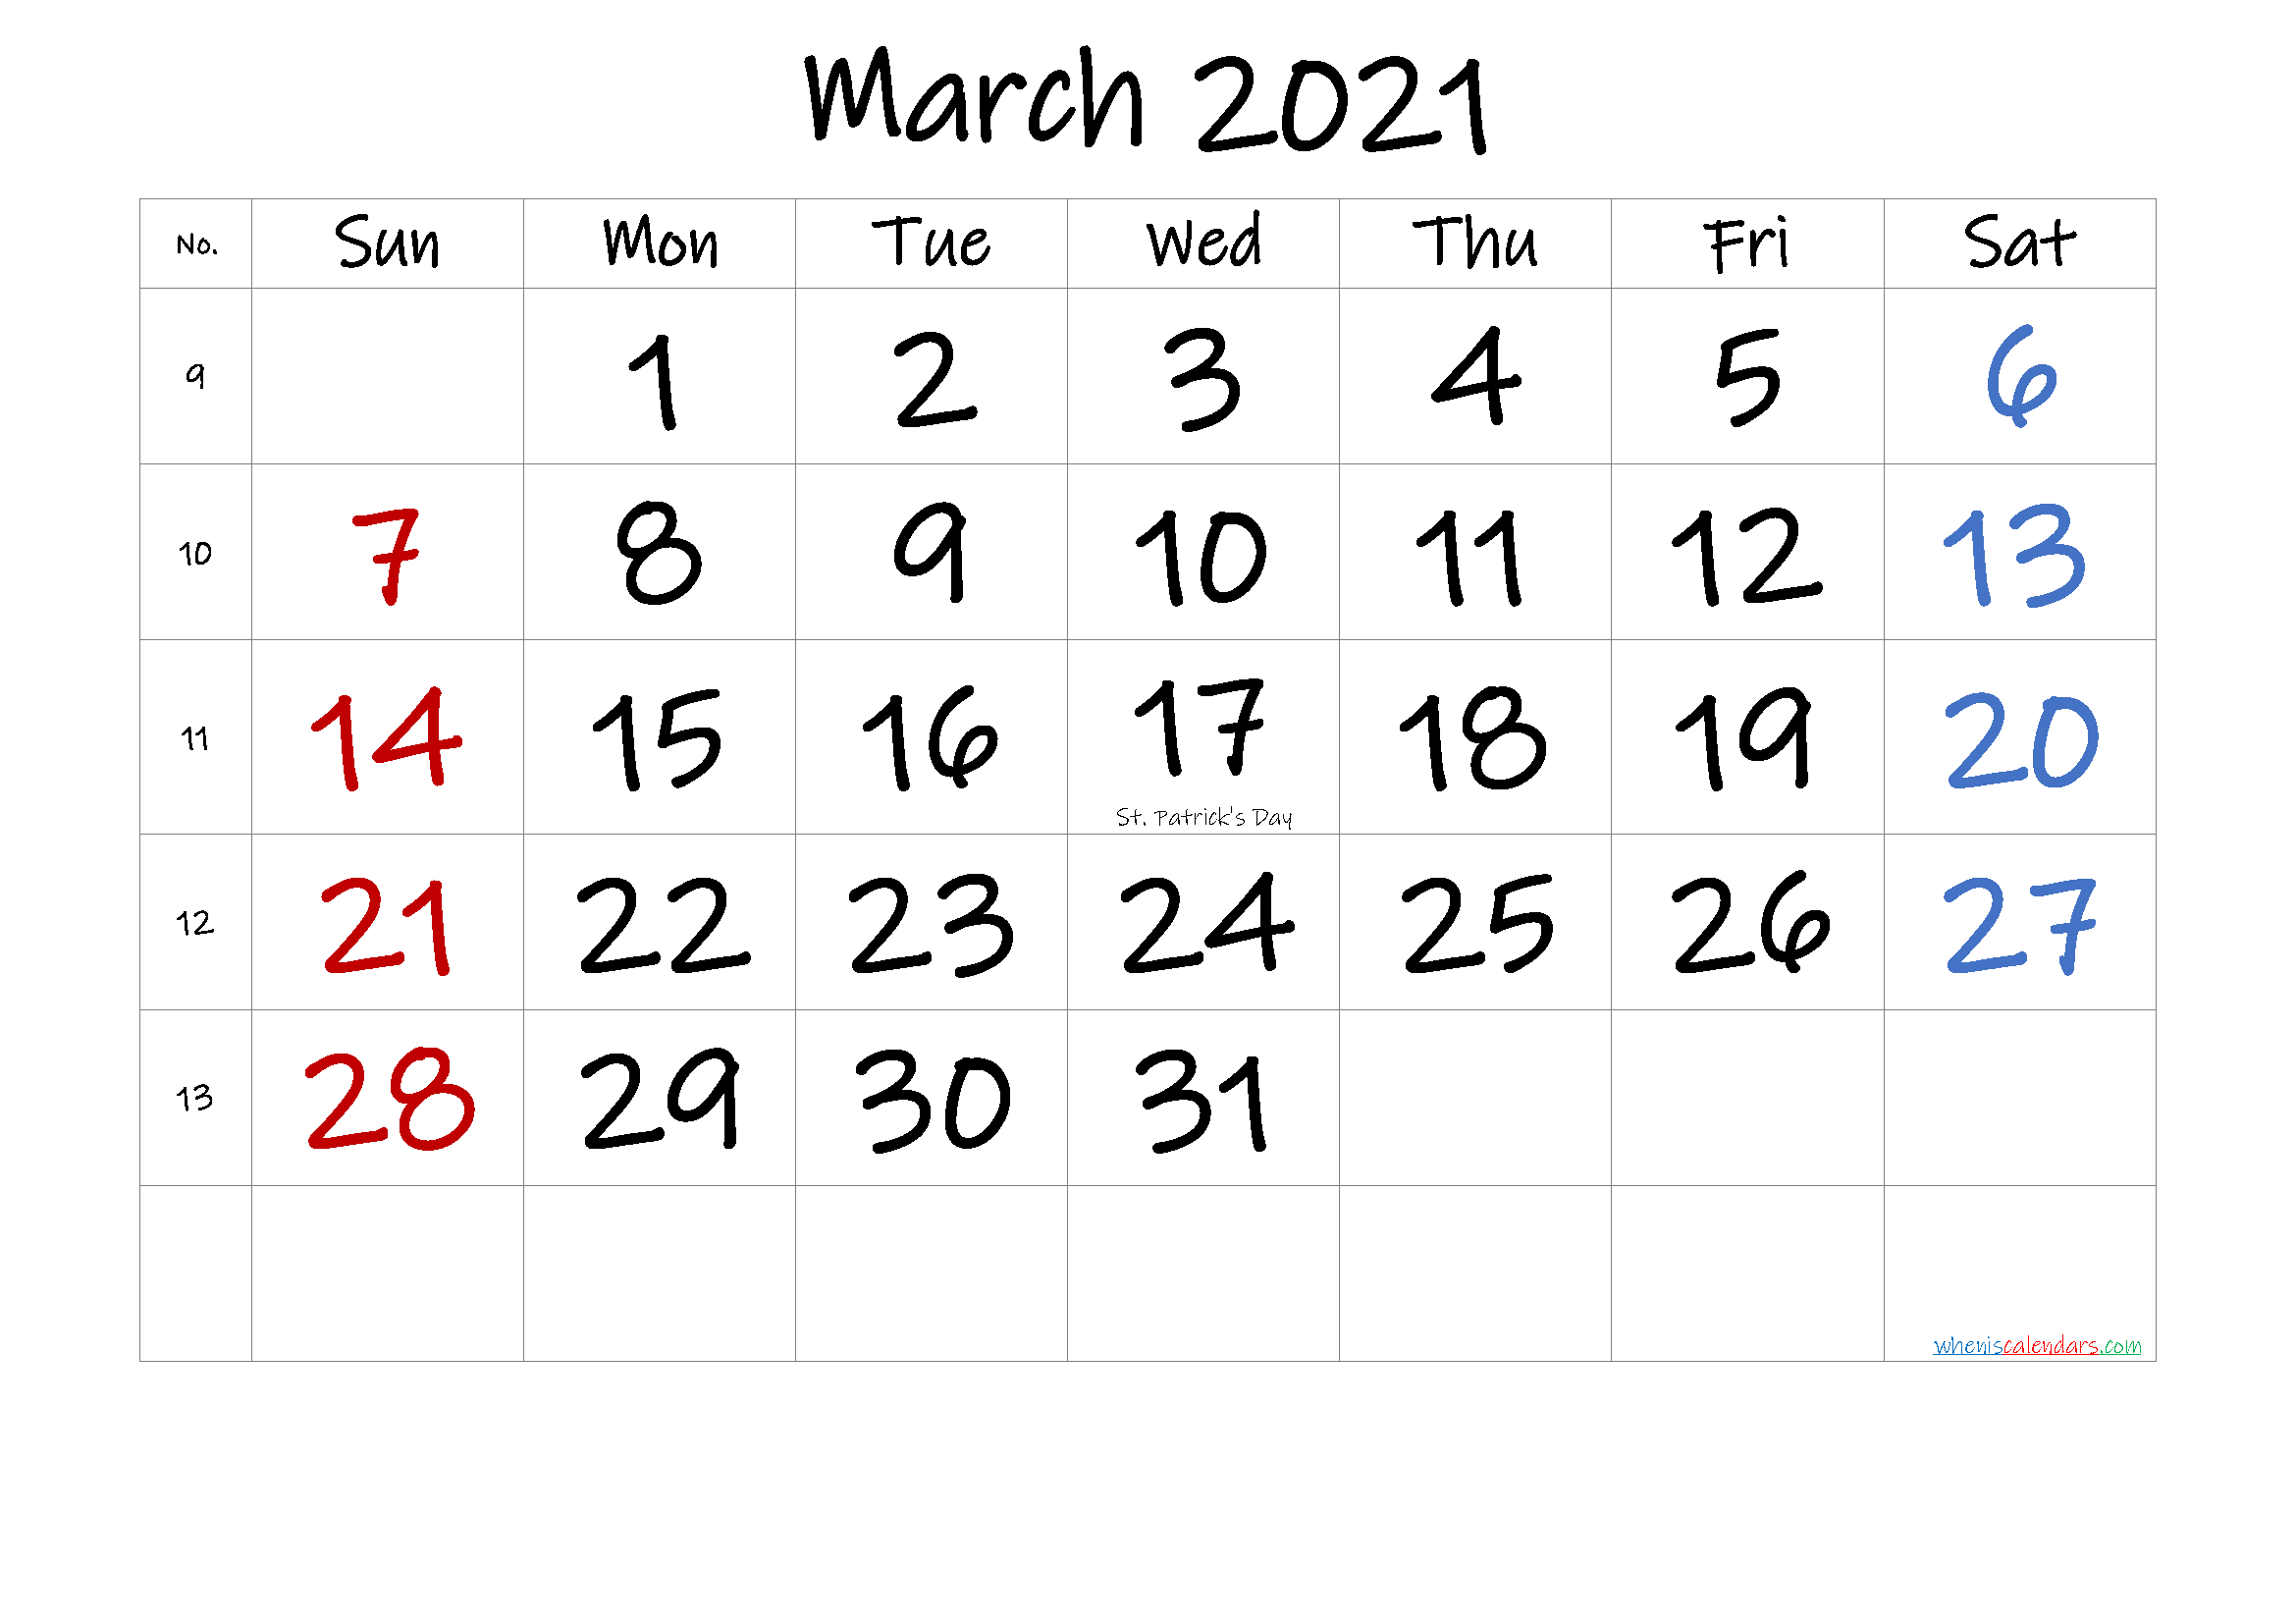 MARCH 2021 Printable Calendar with Holidays